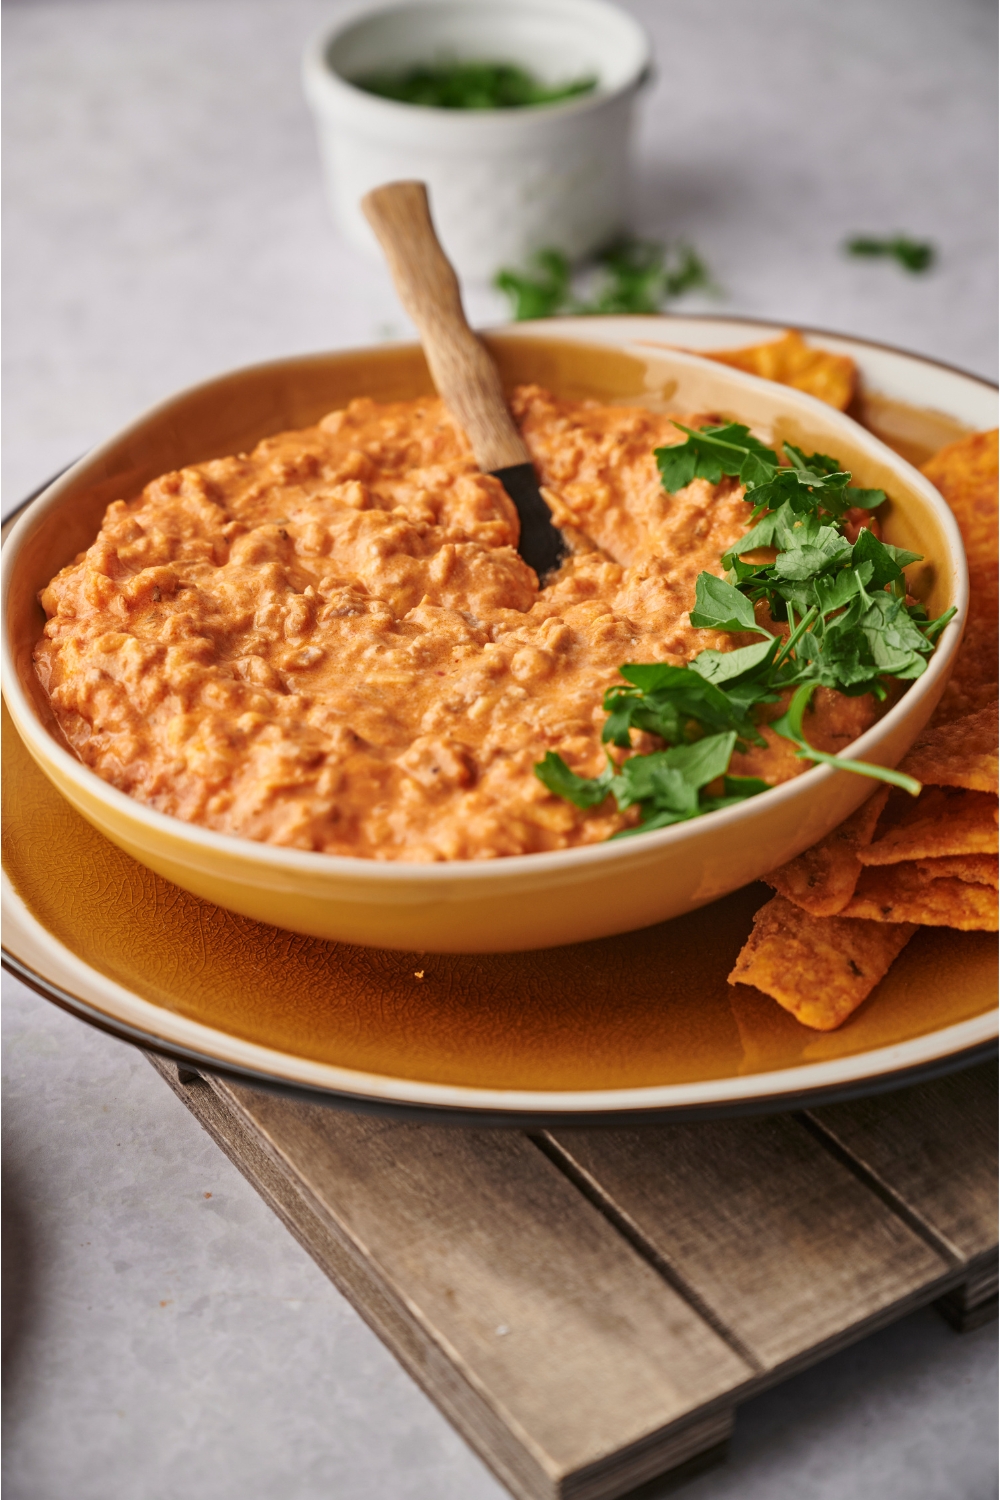 Chili cheese dip in a yellow and white serving bowl with a spoon and fresh herbs in the bowl. The bowl is atop a plate of tortilla chips and a wooden board.